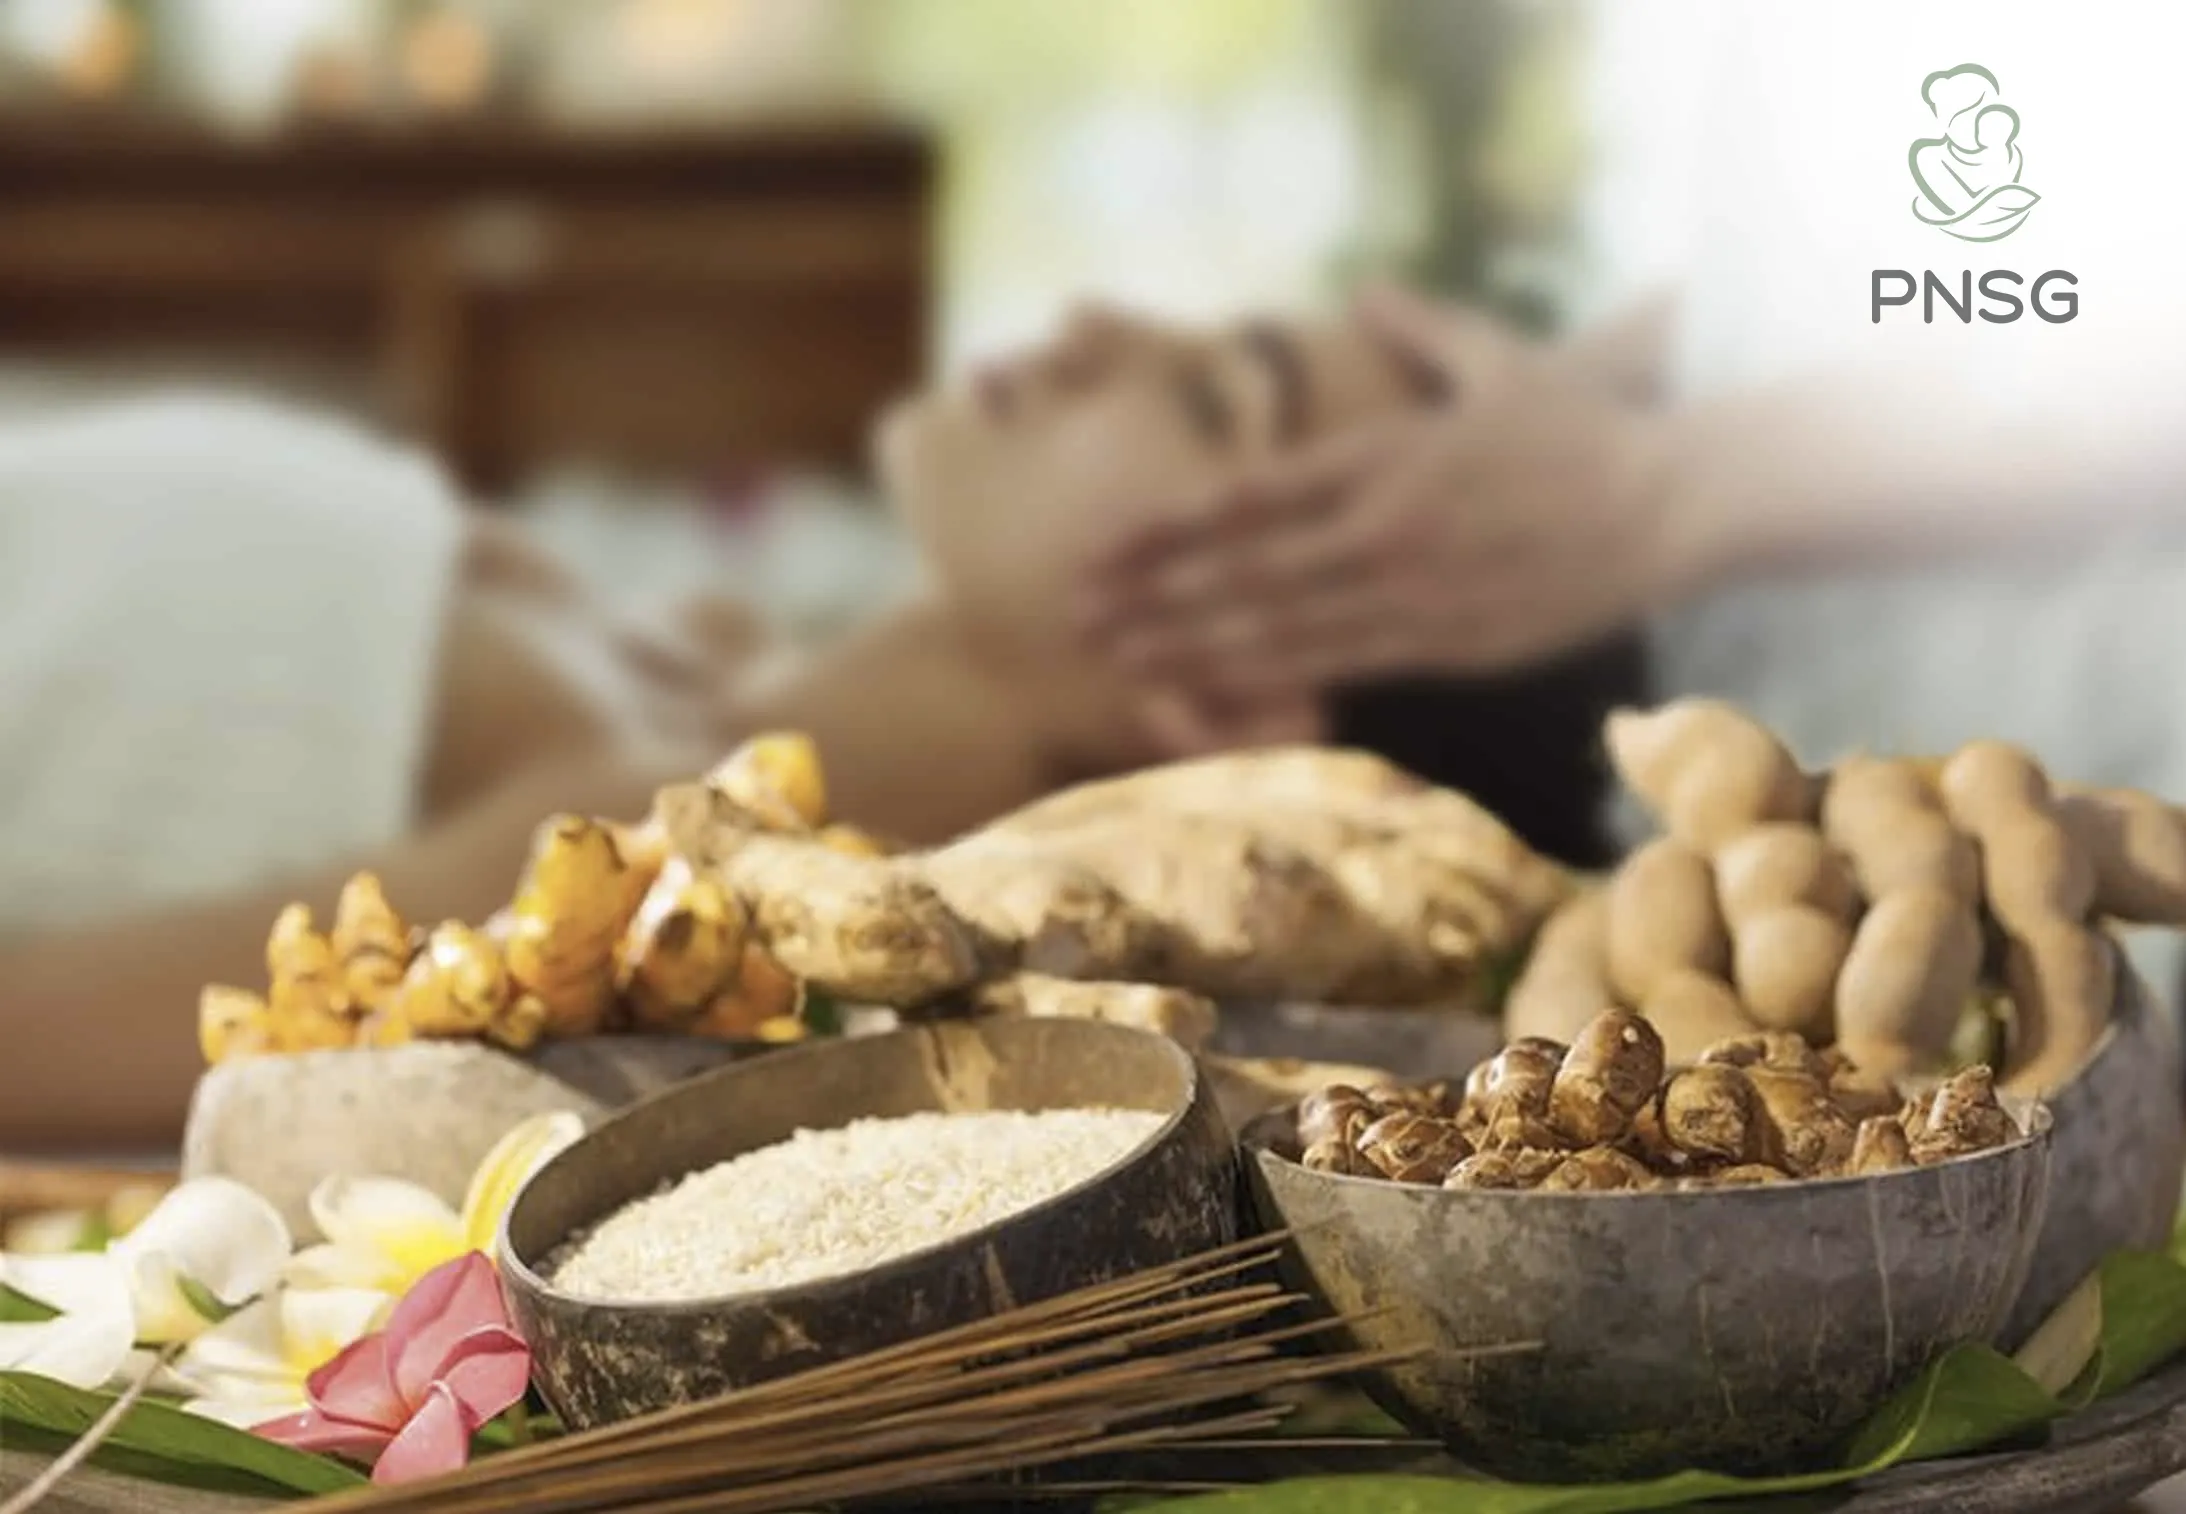 All to Know about Slimming Jamu Massage - PNSG